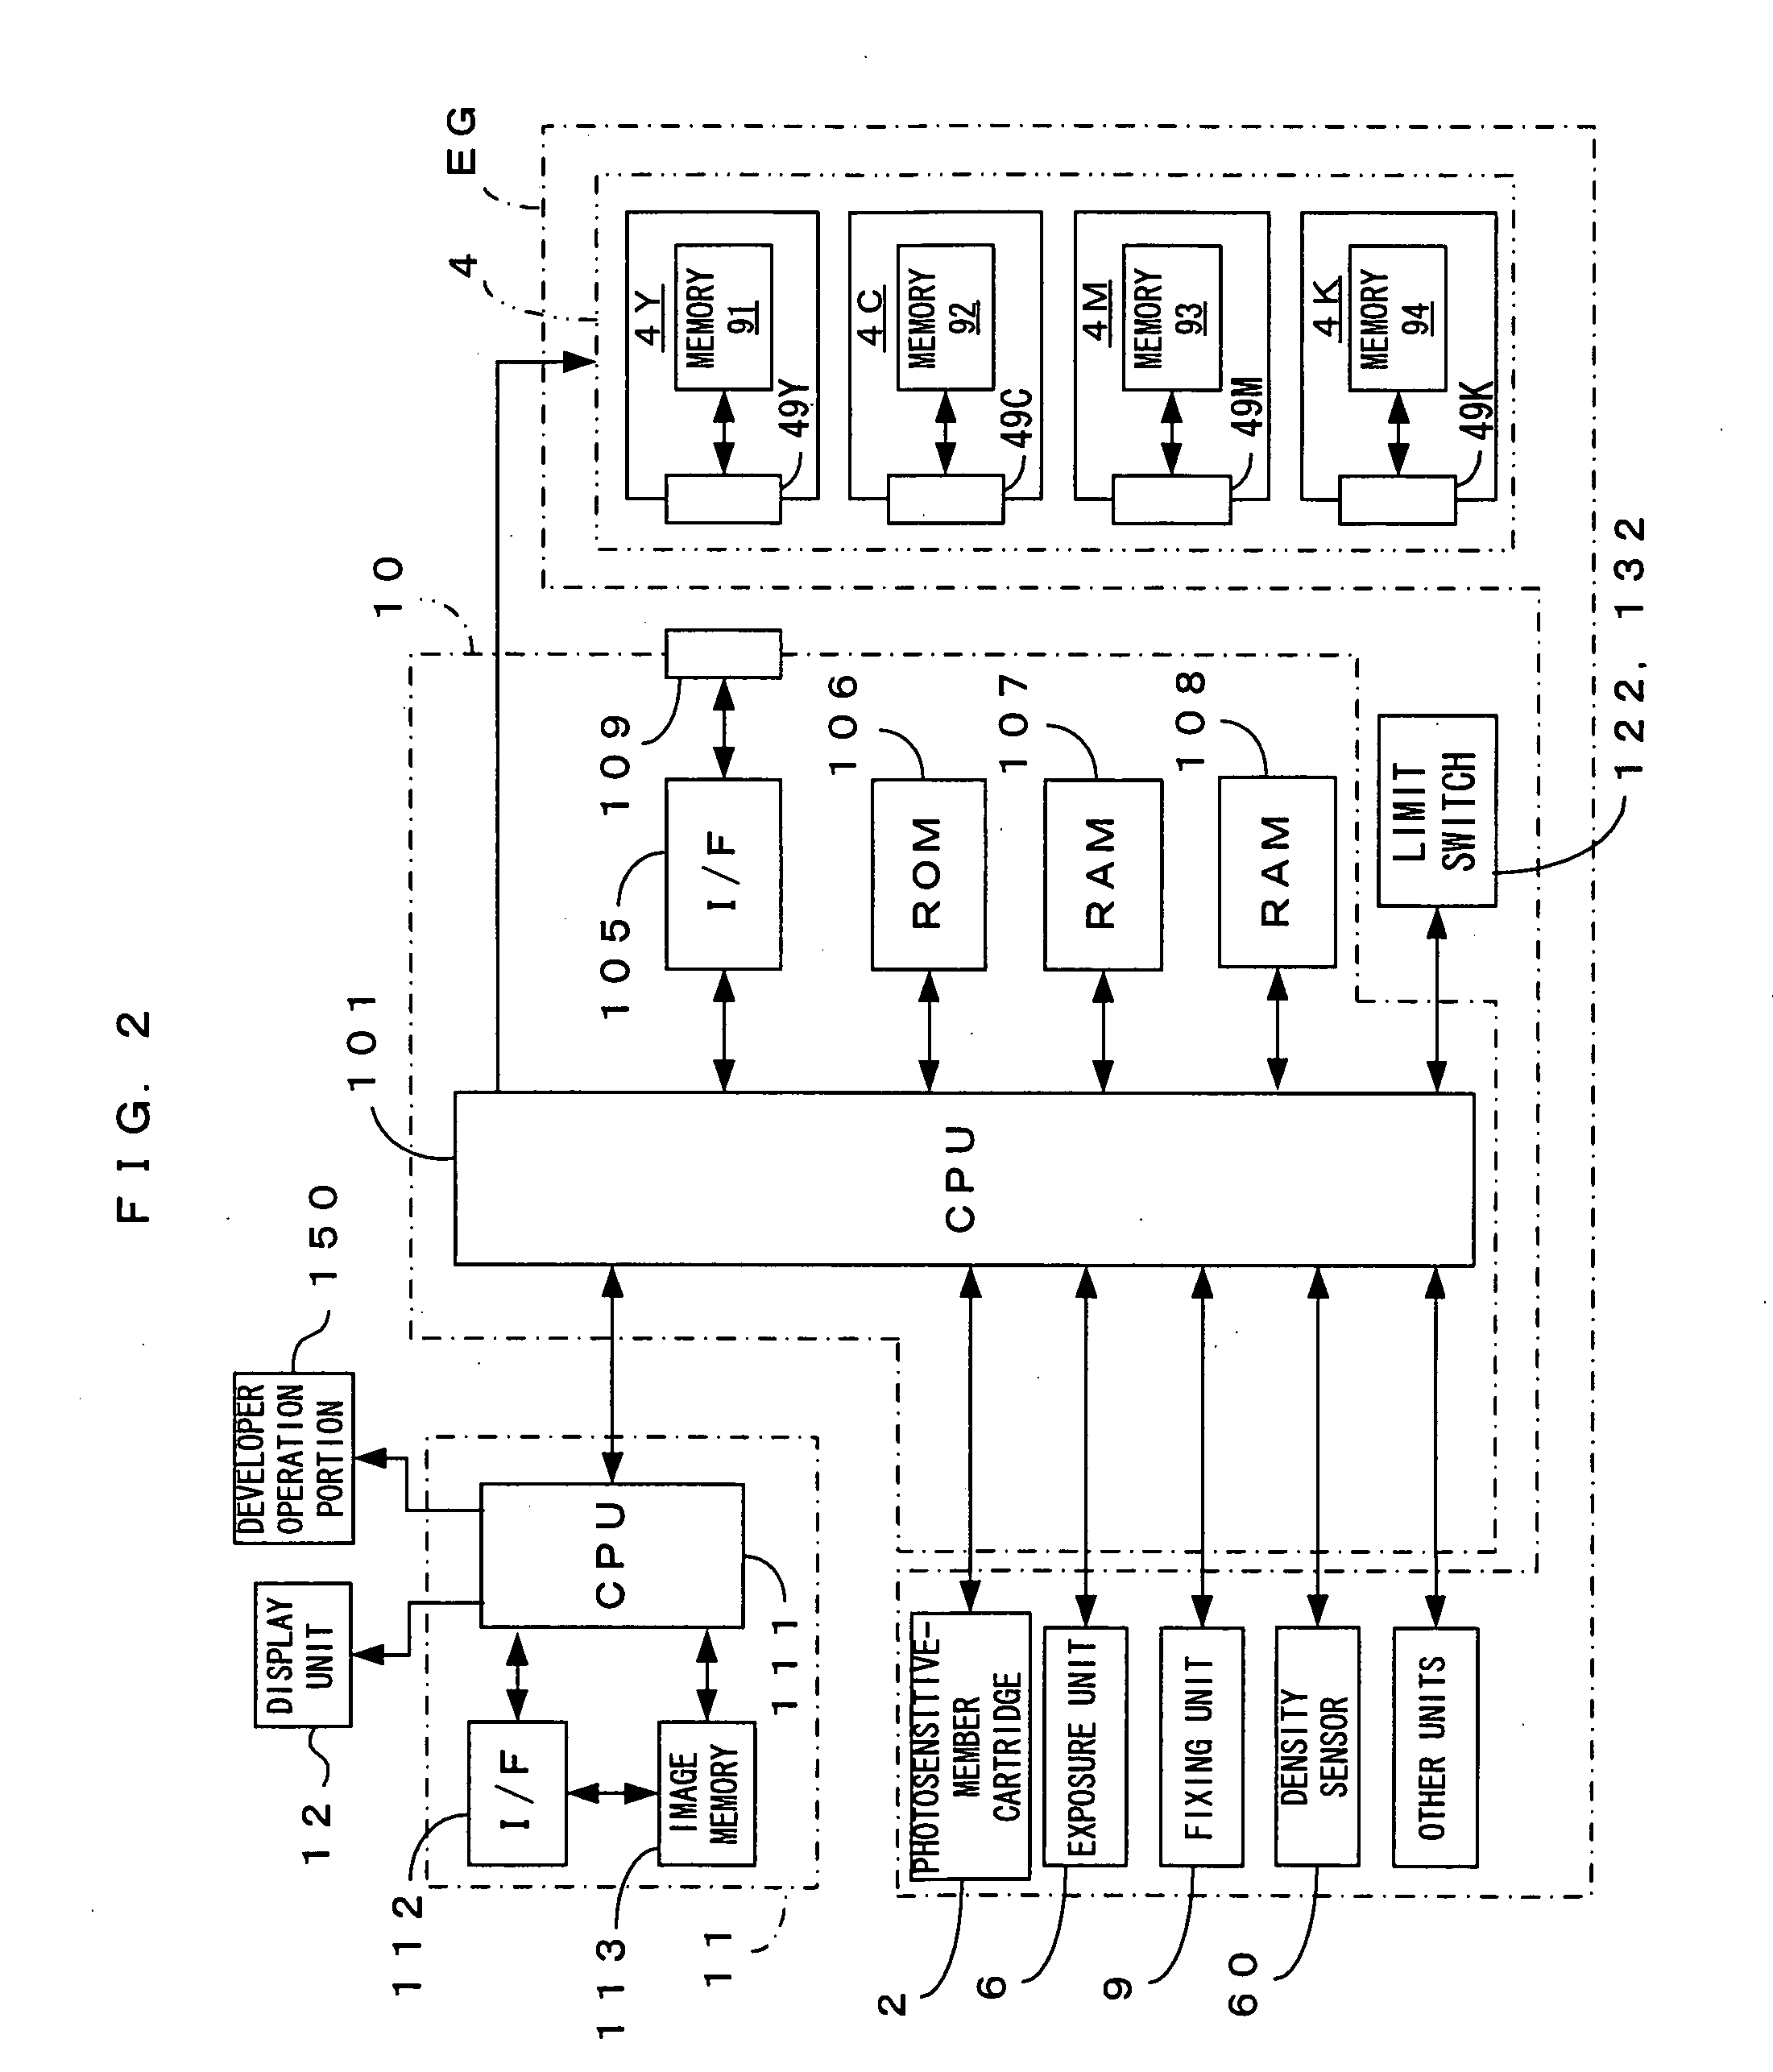 Image forming apparatus and control method of that apparatus